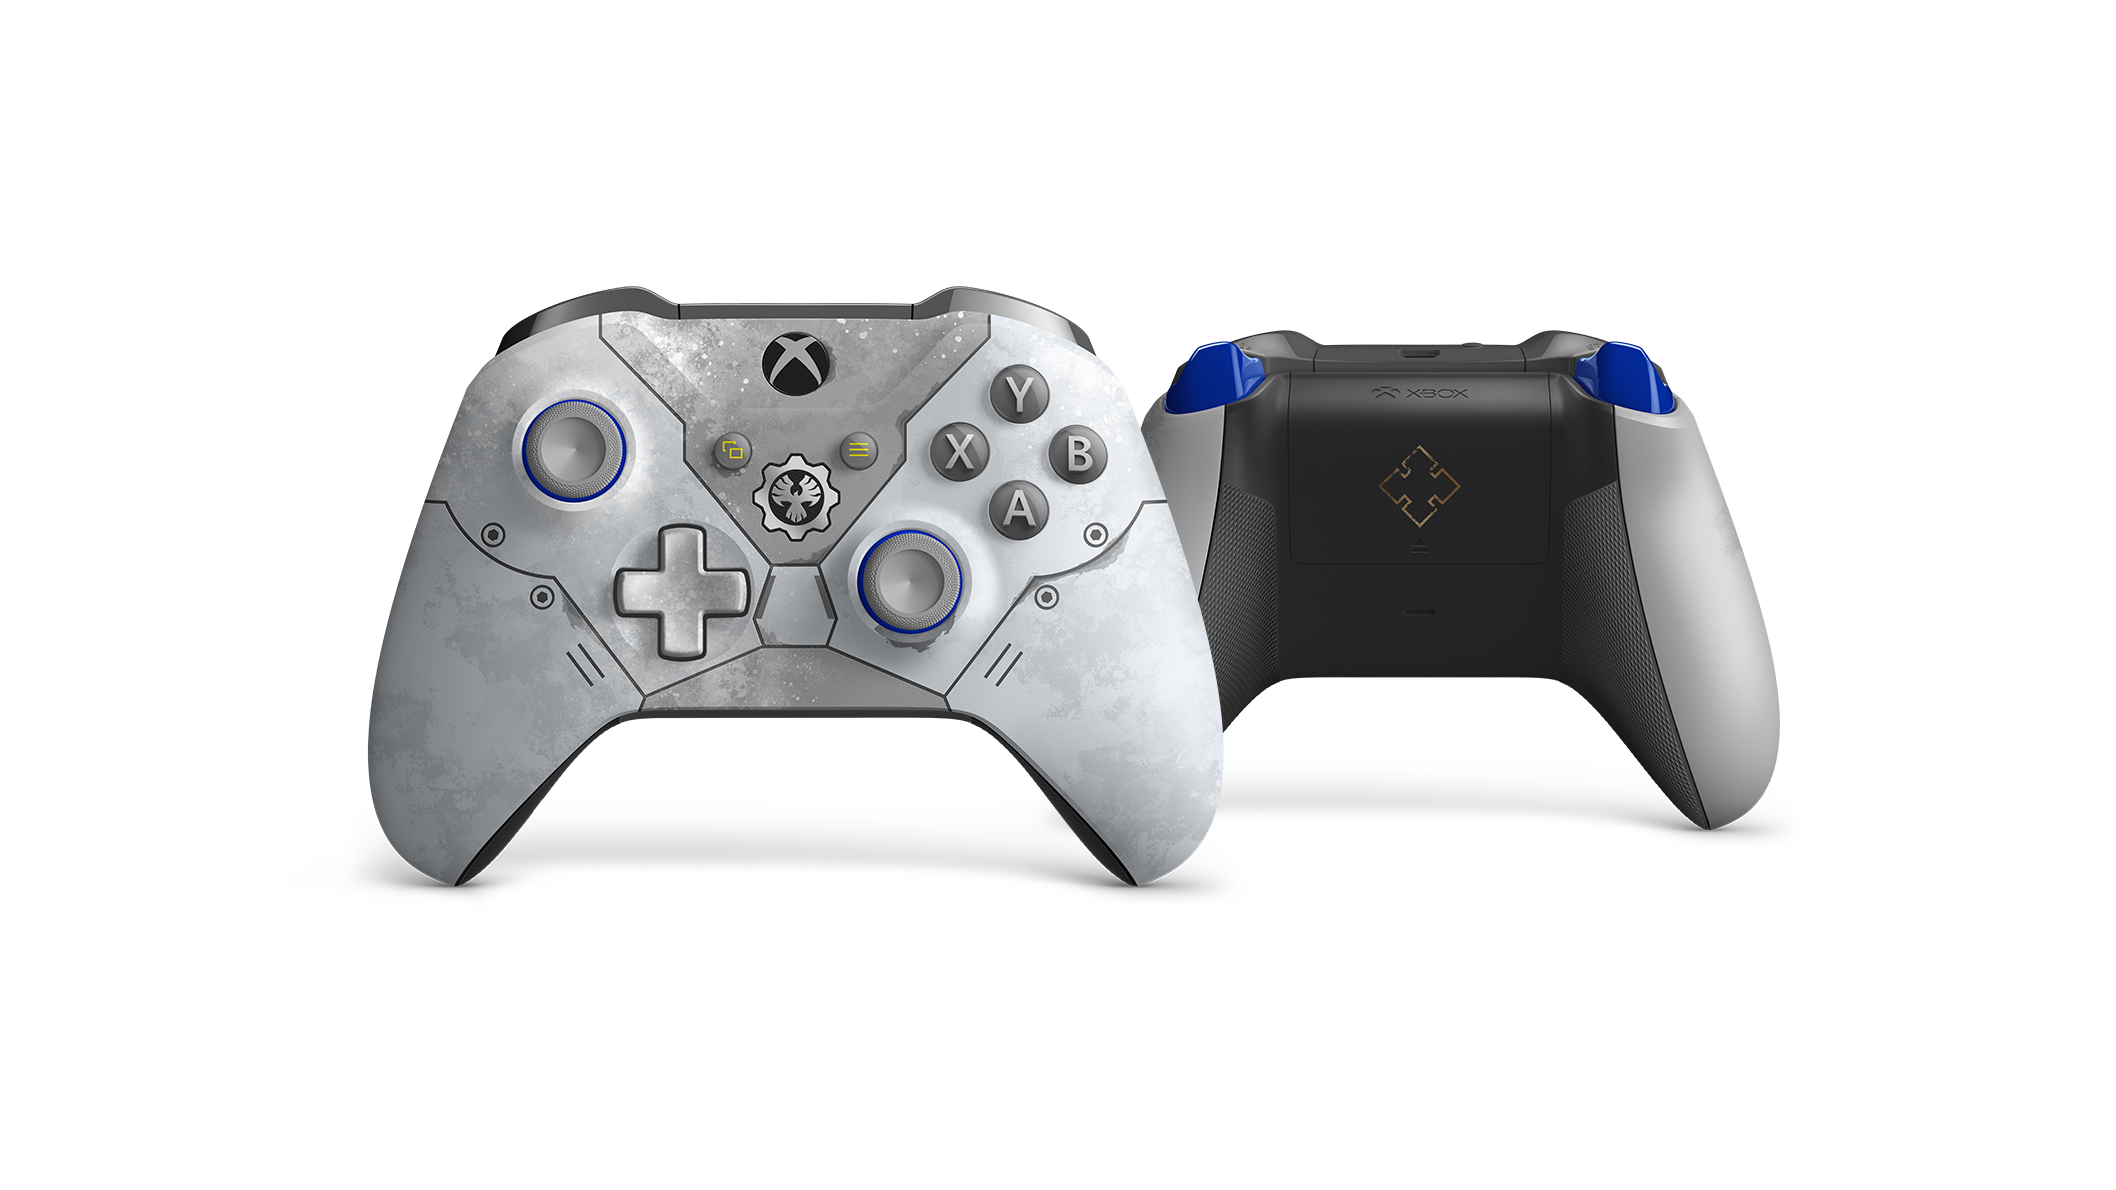 xbox one gears 5 controller